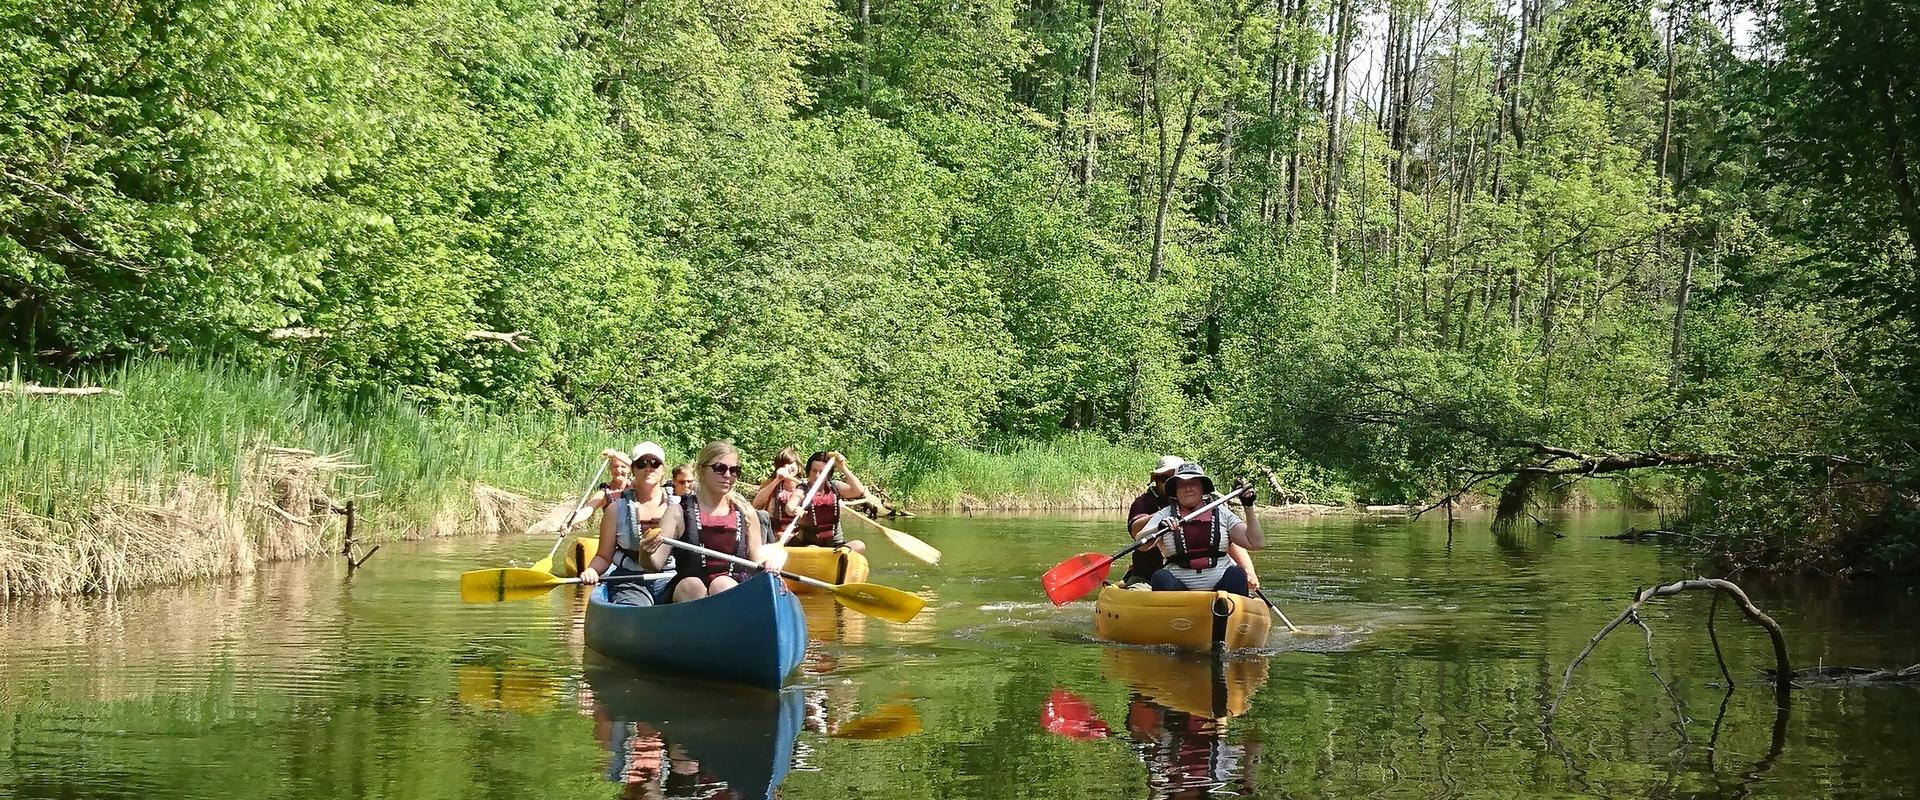 The best way to explore Soomaa National Park is going on a canoe trip! Canoeing is suitable for people of all ages, which means you can bring your who